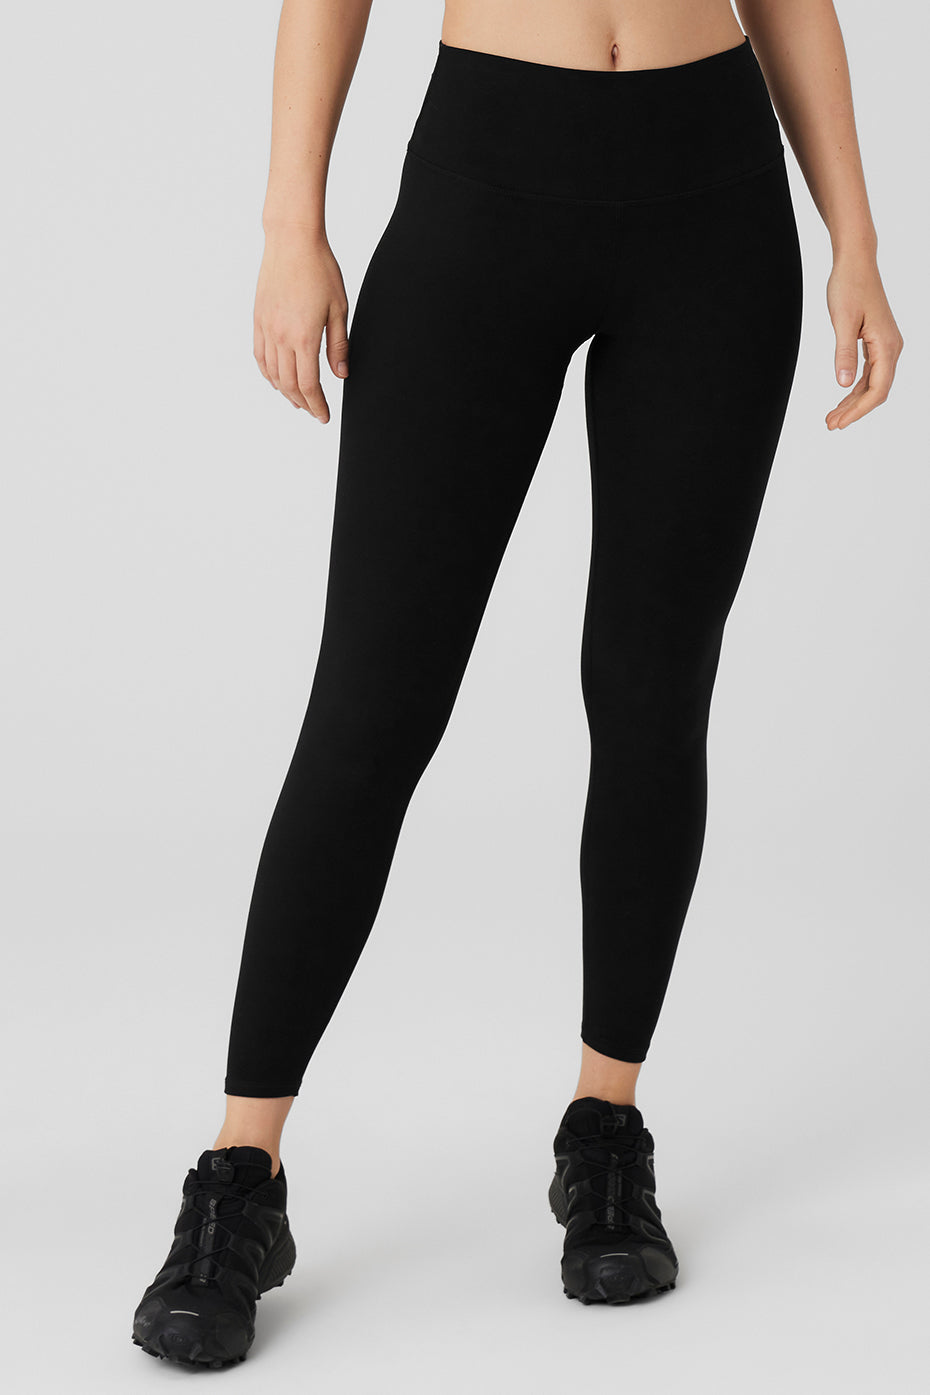 NEW Alo Yoga Pant High-Waist Ultimate Legging W5574R Color Anthracite Size  Small